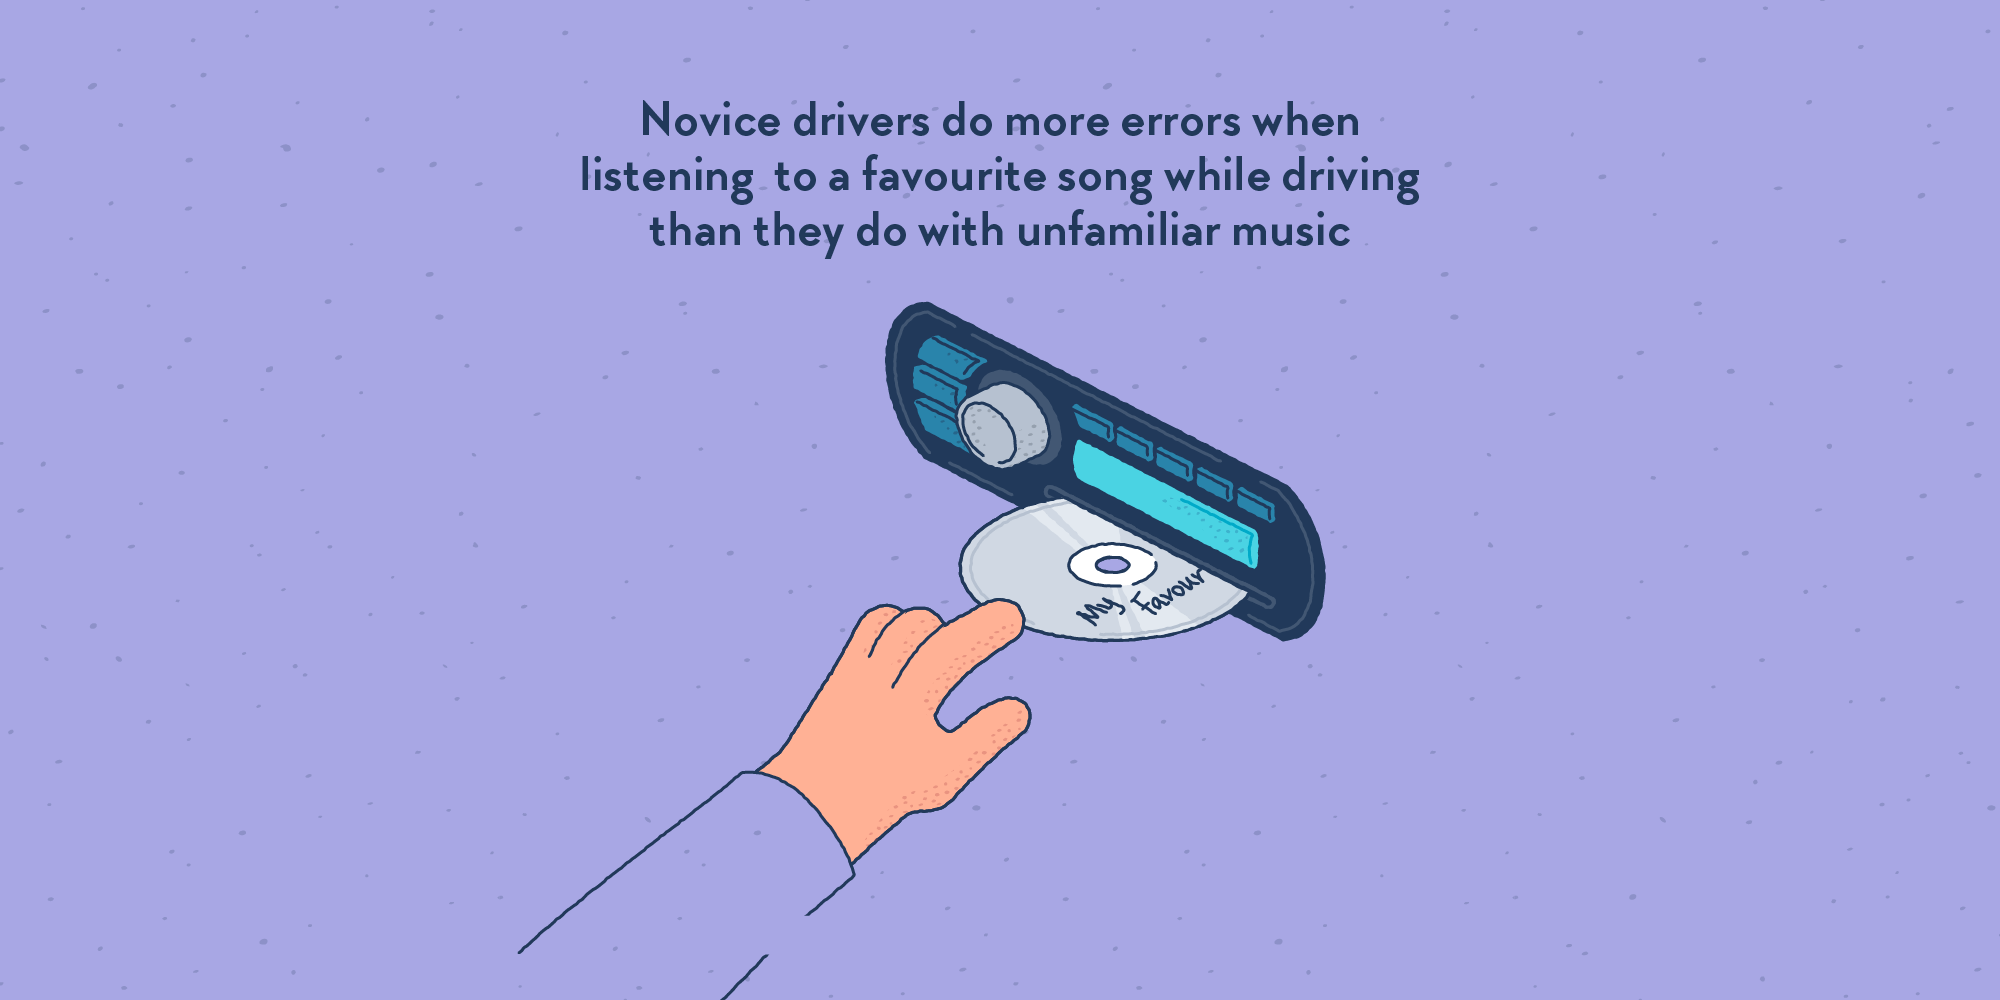 A hand inserting a CD in a car radio. Handwritten with a marker on the CD: “My Favourites”.